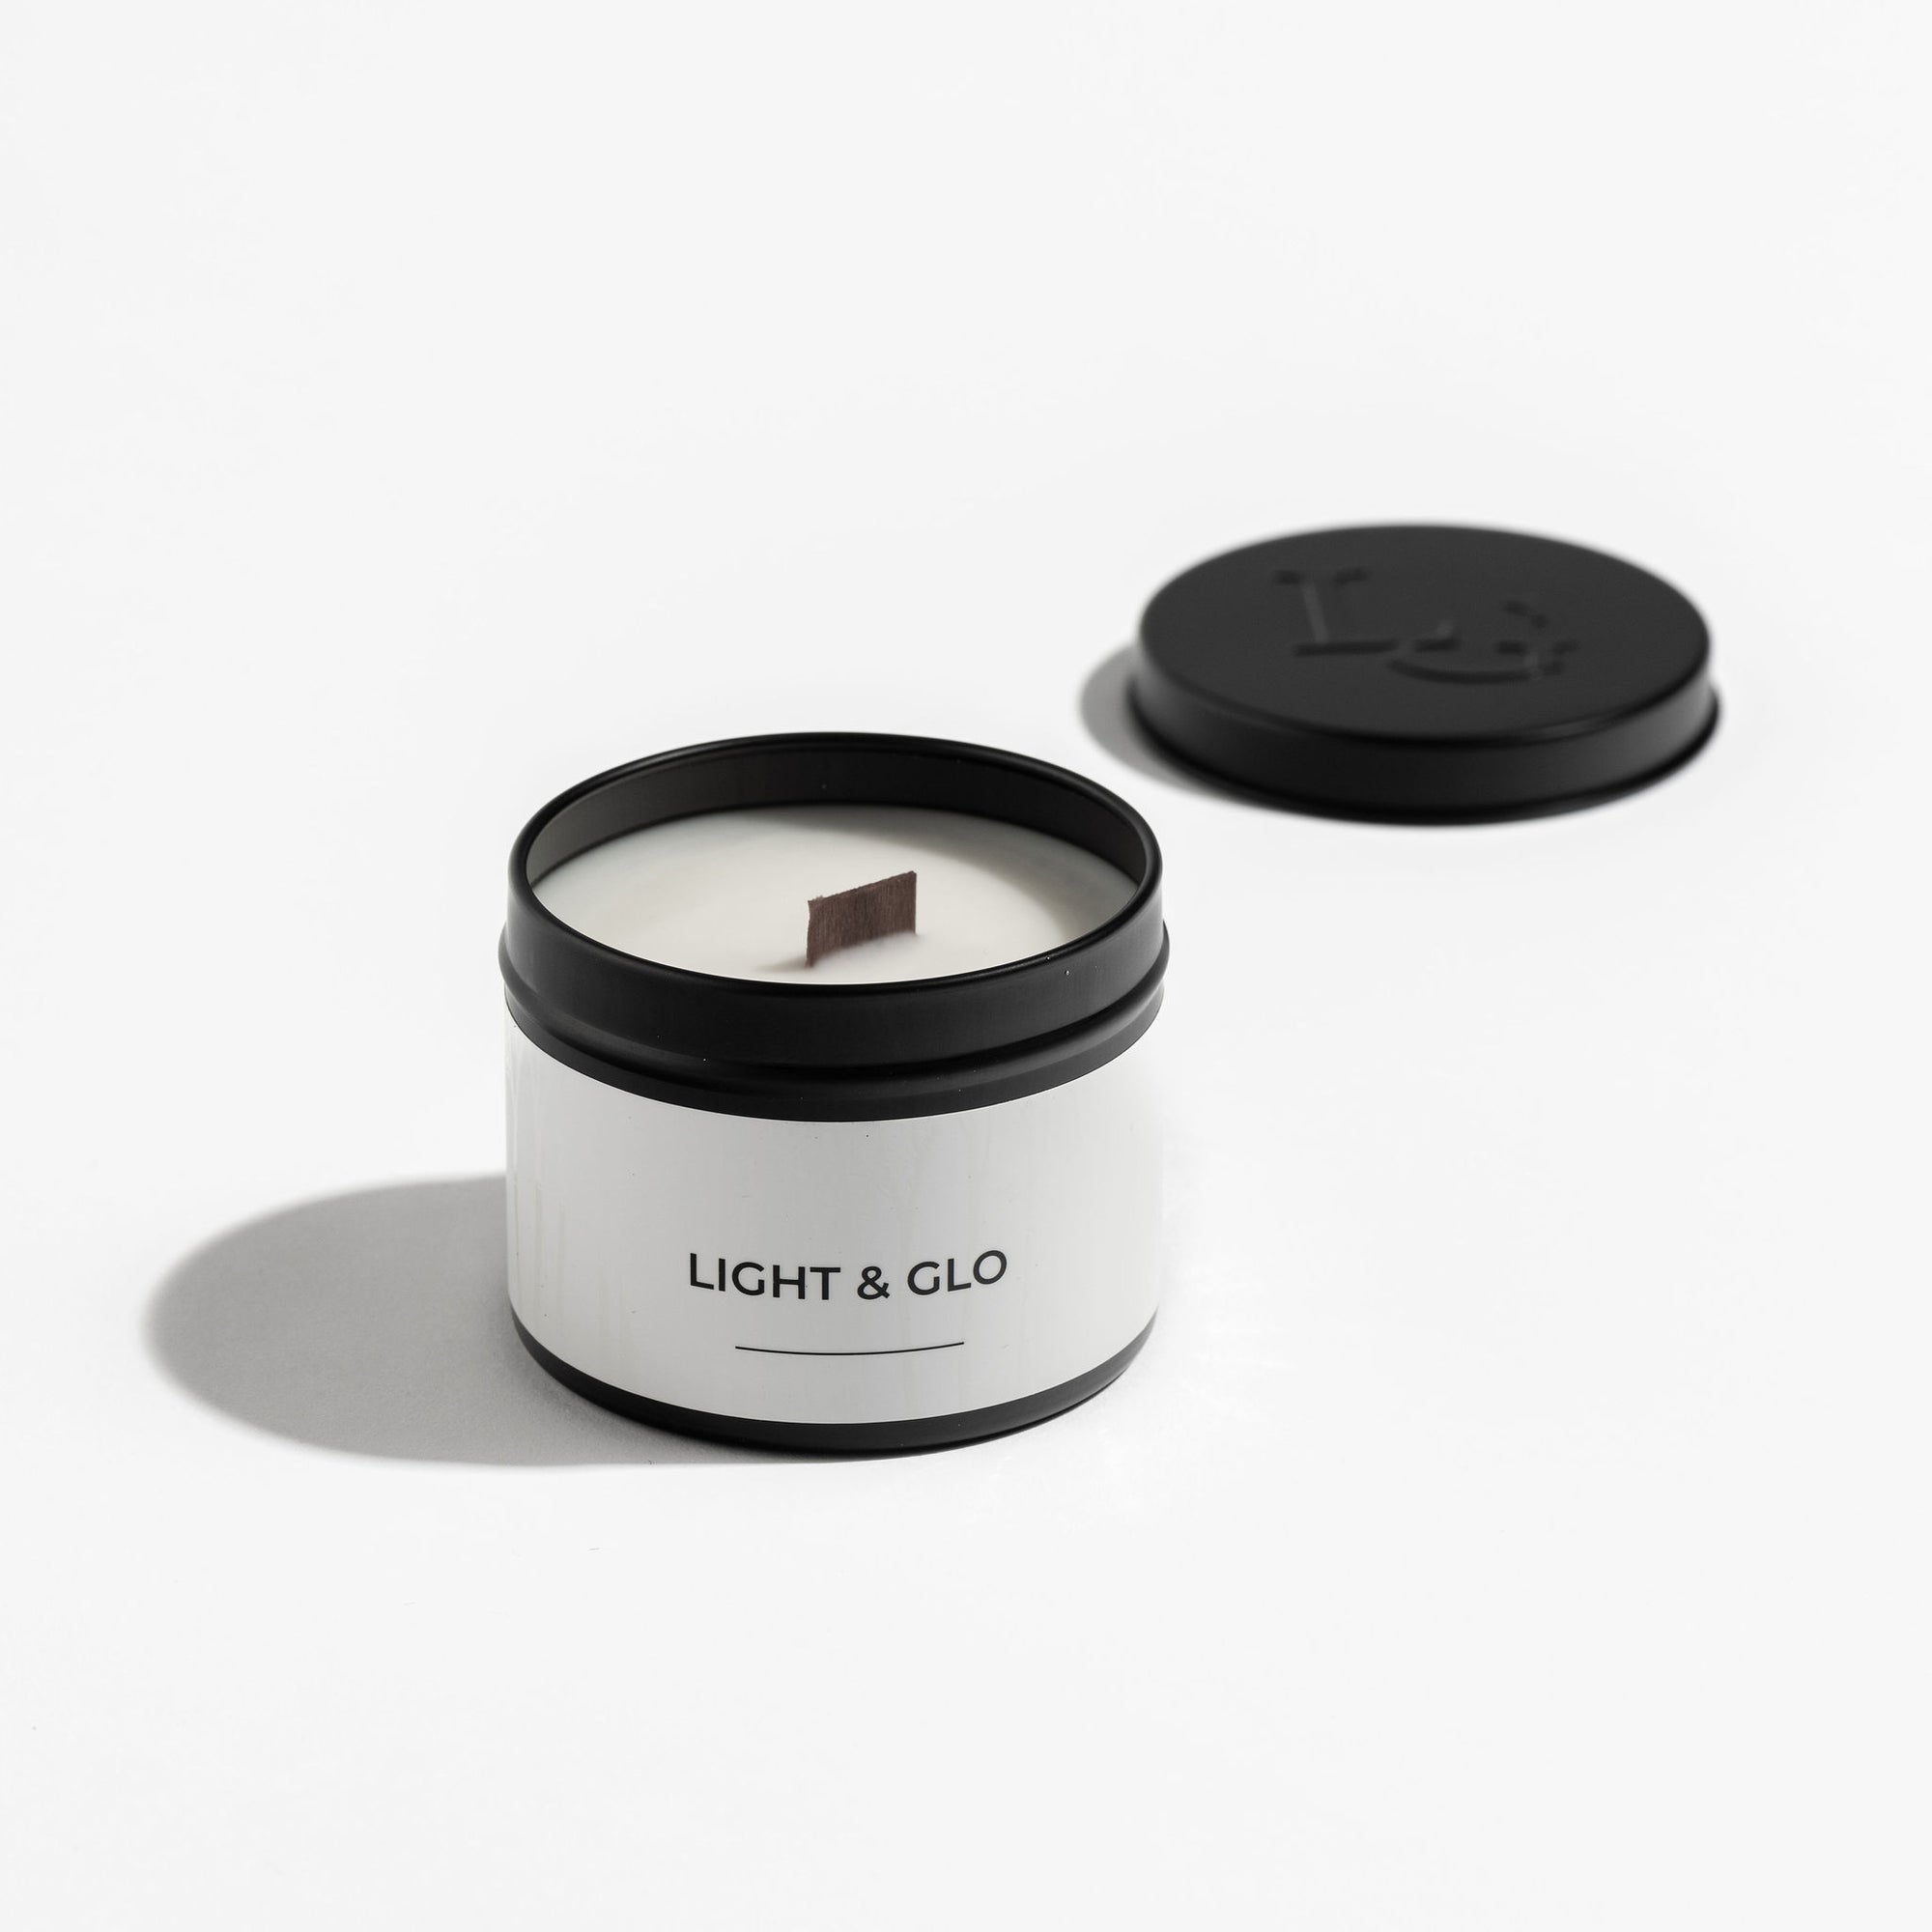 Coconut & Lime - Monochrome Travel Candle | Luxury Candles & Home Fragrances by Light + Glo